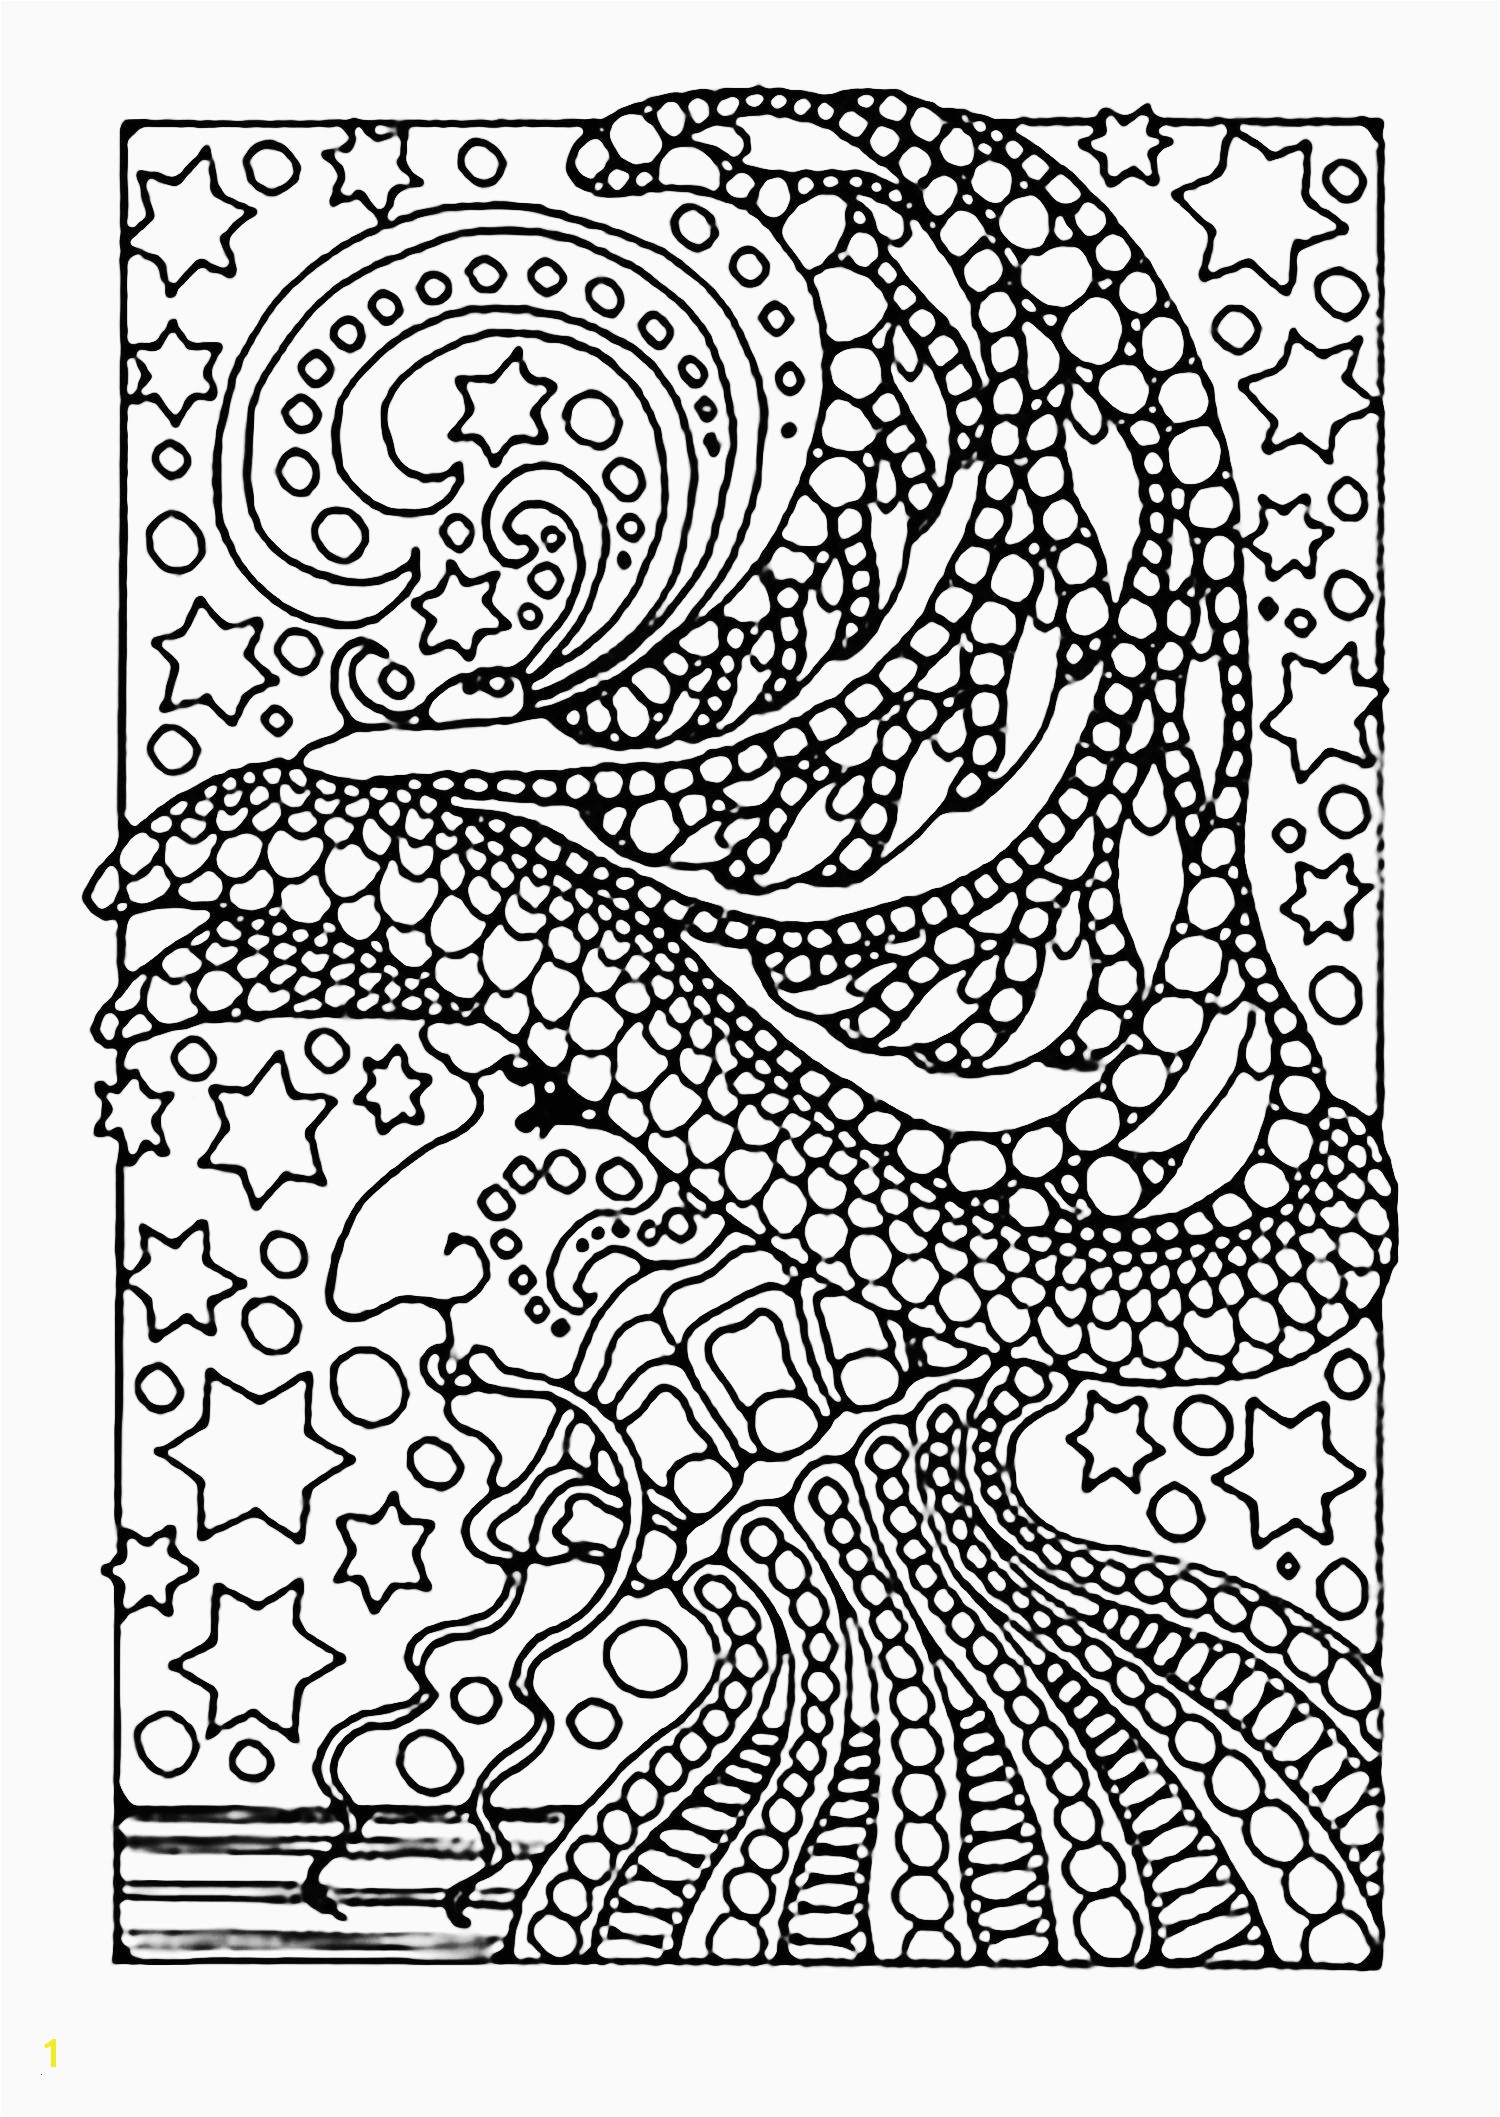 Birthday themed Coloring Pages Free Dog Coloring Pages Mikalhameed